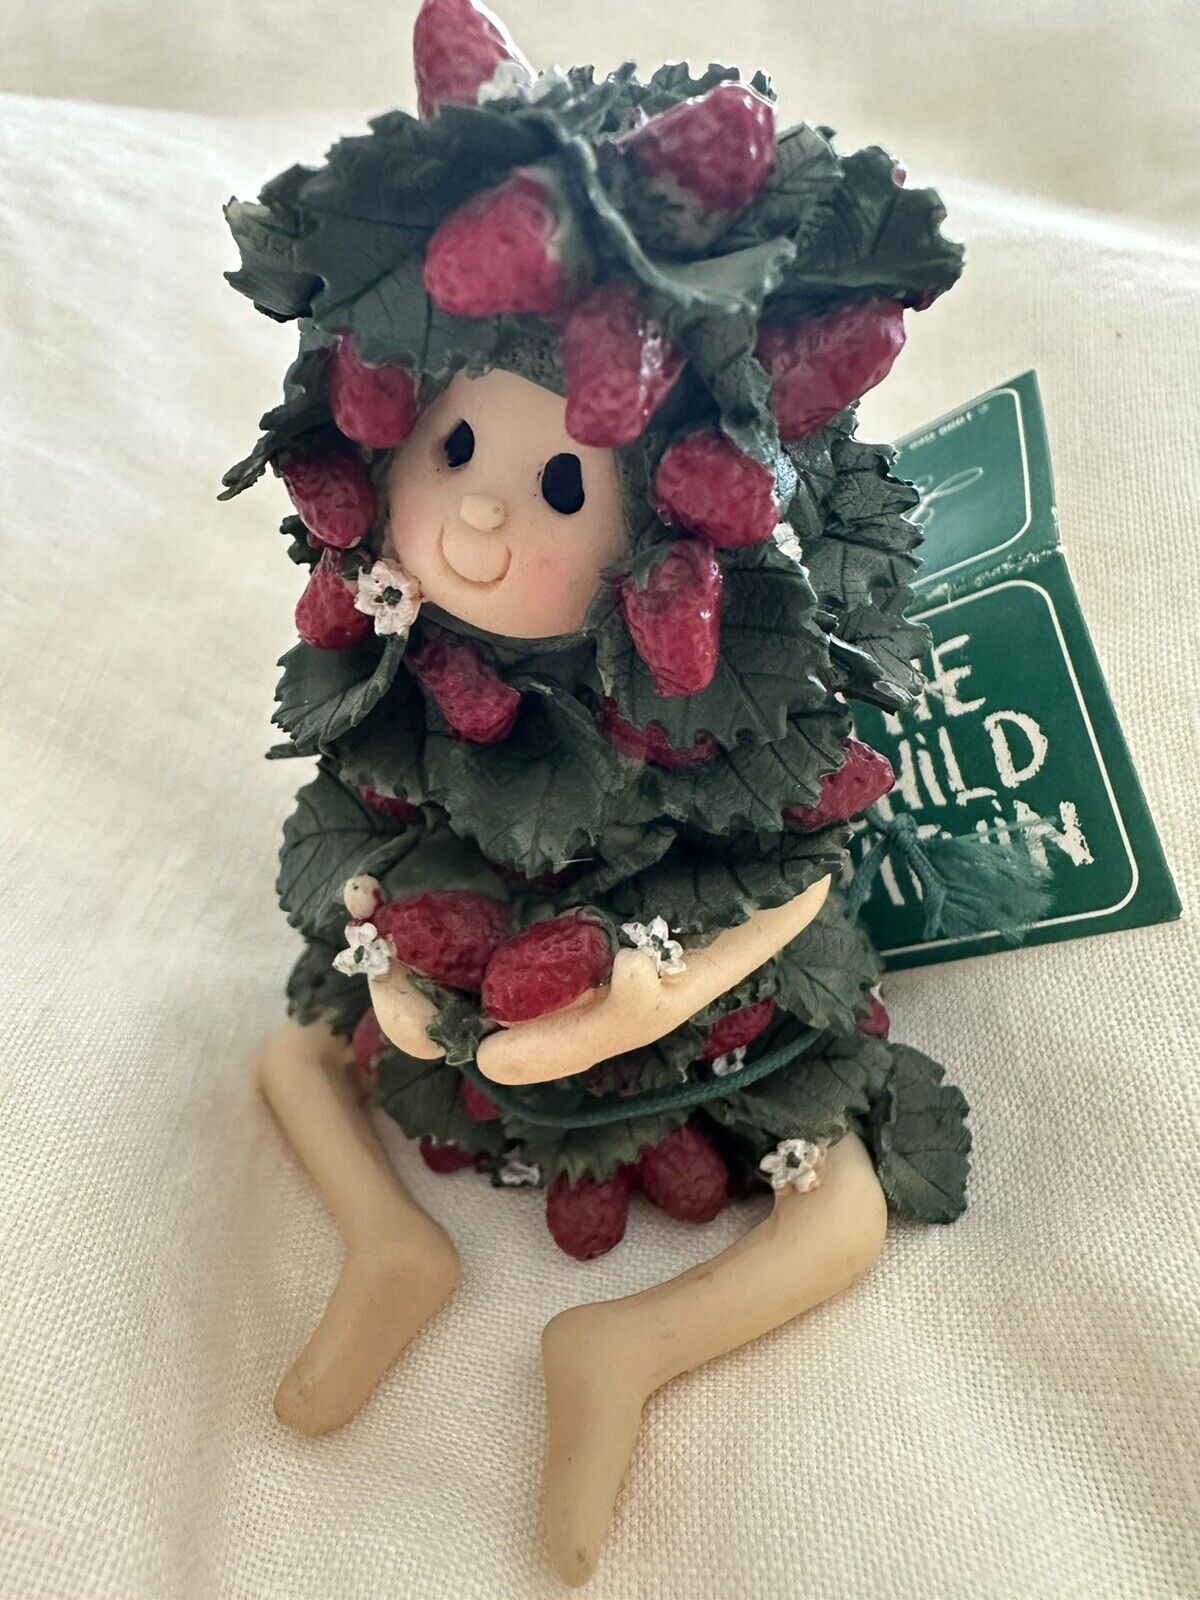 Vintage 1998 Lefton The Child Within Resin Strawberry Figurine “Sweetie”